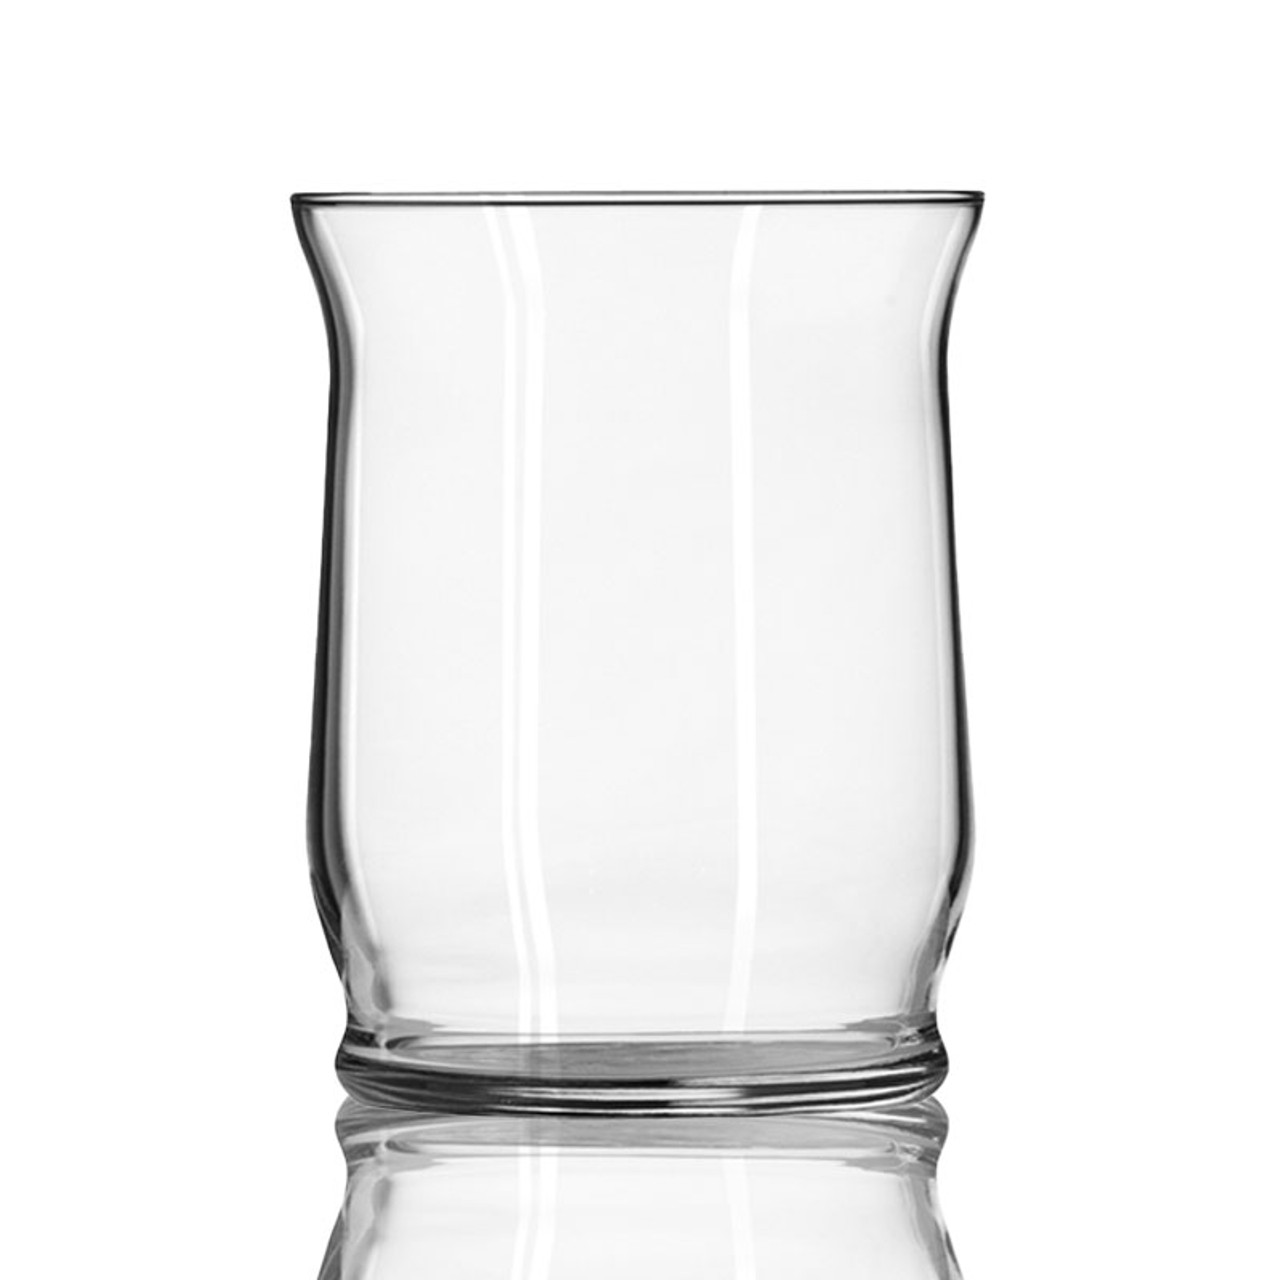 https://cdn11.bigcommerce.com/s-znjh1s2dil/images/stencil/1280x1280/products/290/621/Libbey-Hurricane-glass__15457.1681330561.jpg?c=1